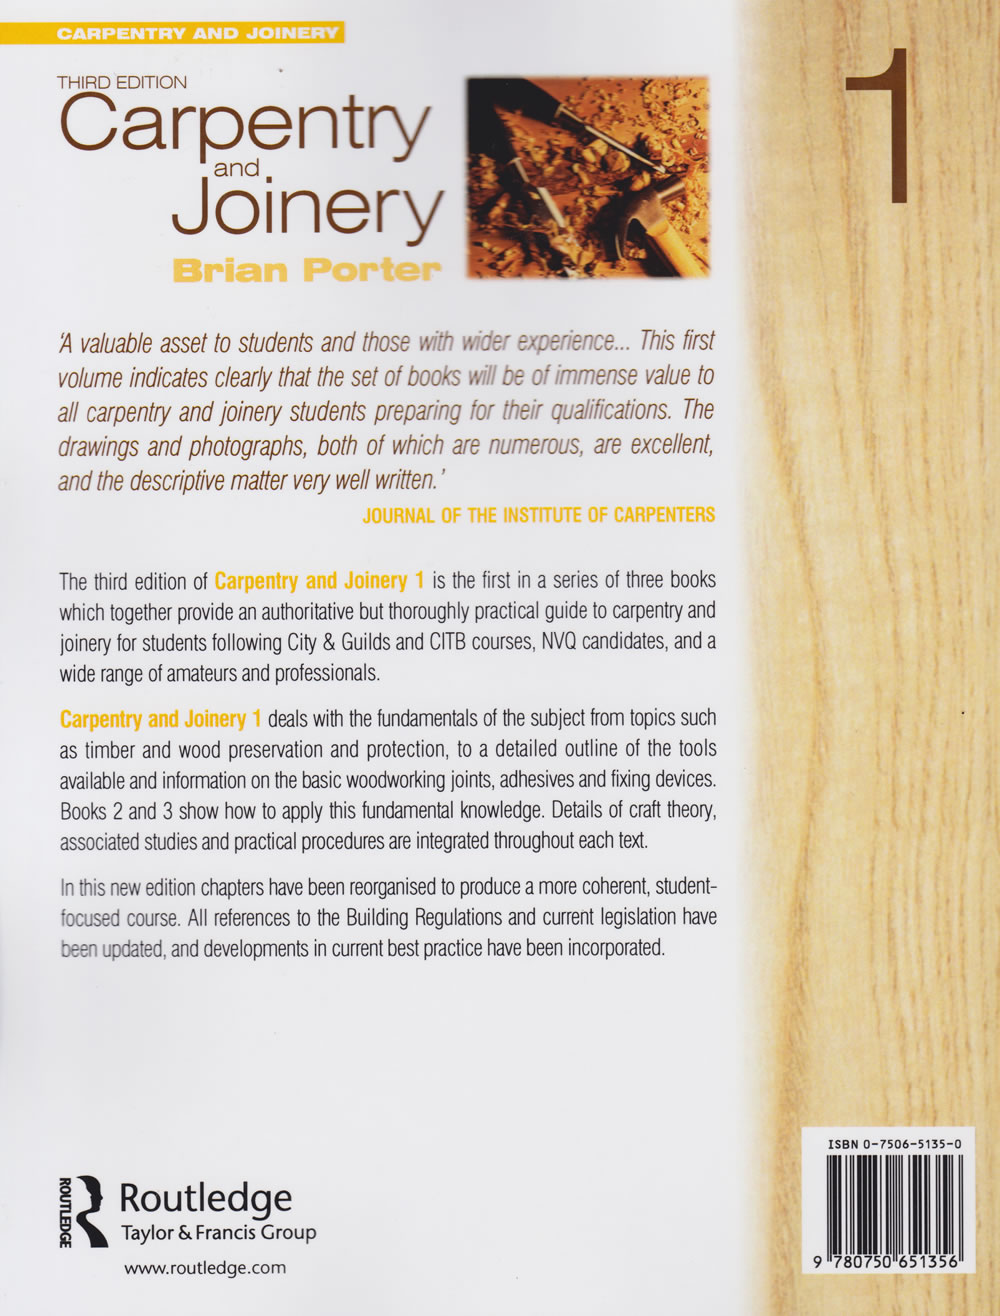 Carpentry and Joinery 1 3rd Edition Text Book Centre